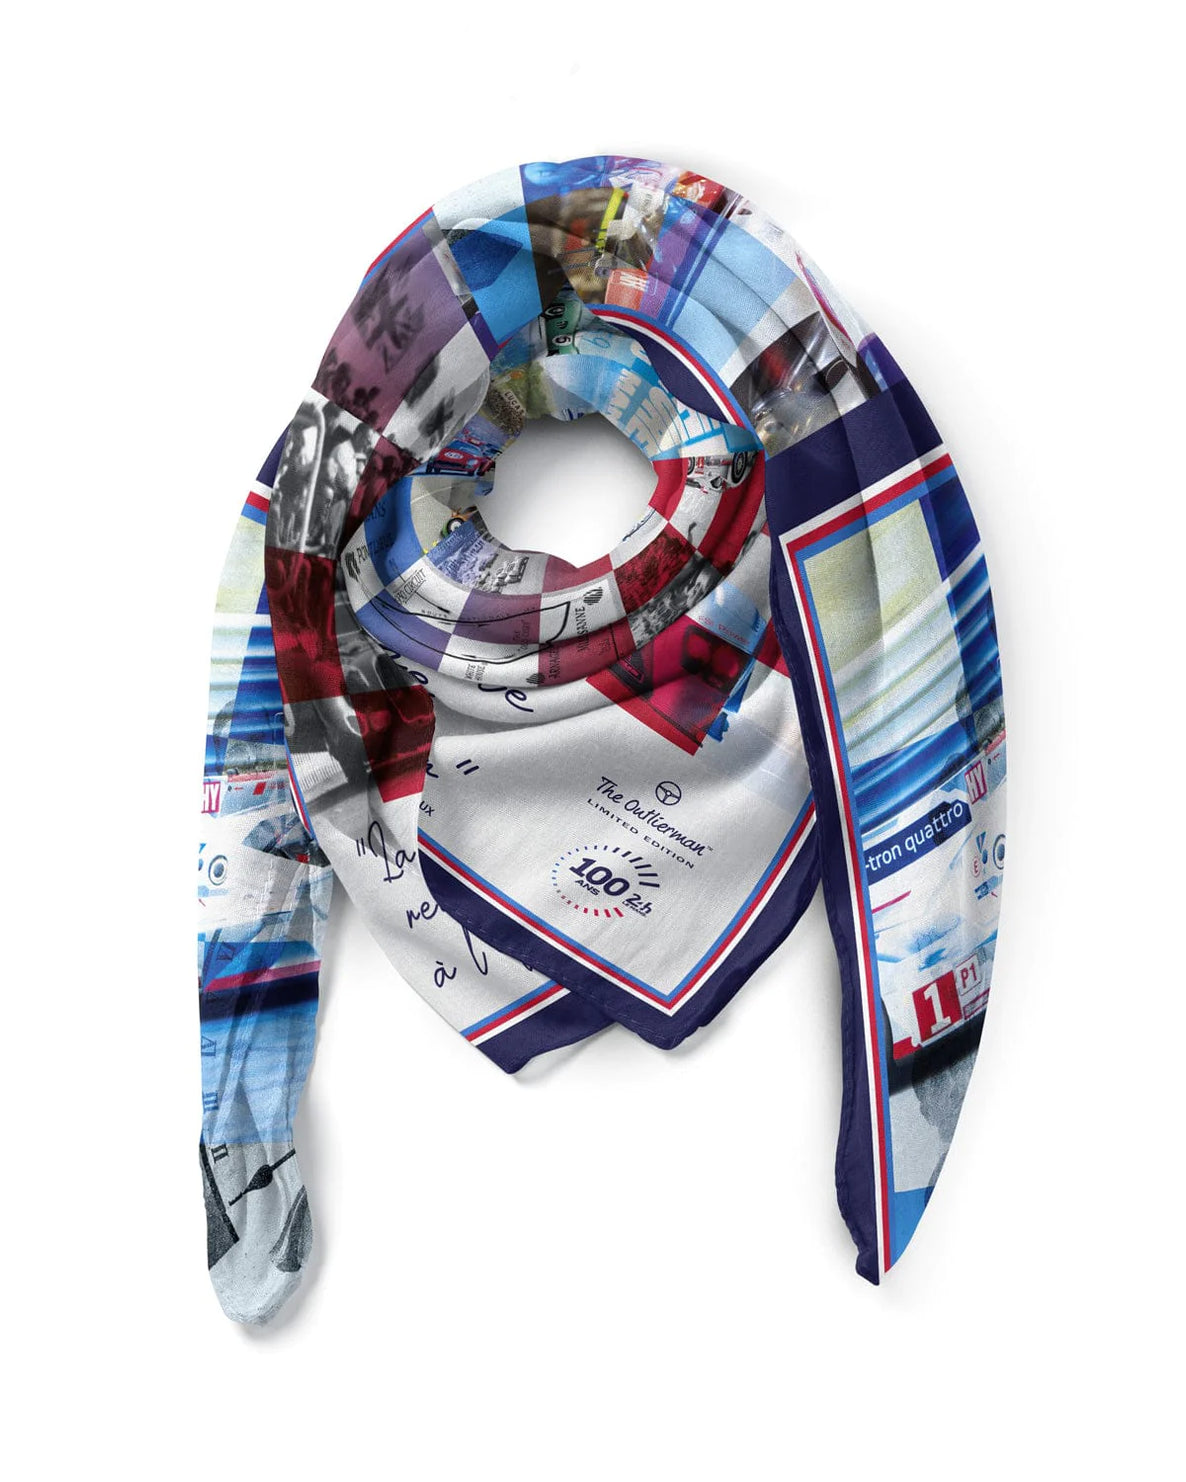 Centenary 24 Hours of Le Mans - Silk Scarf